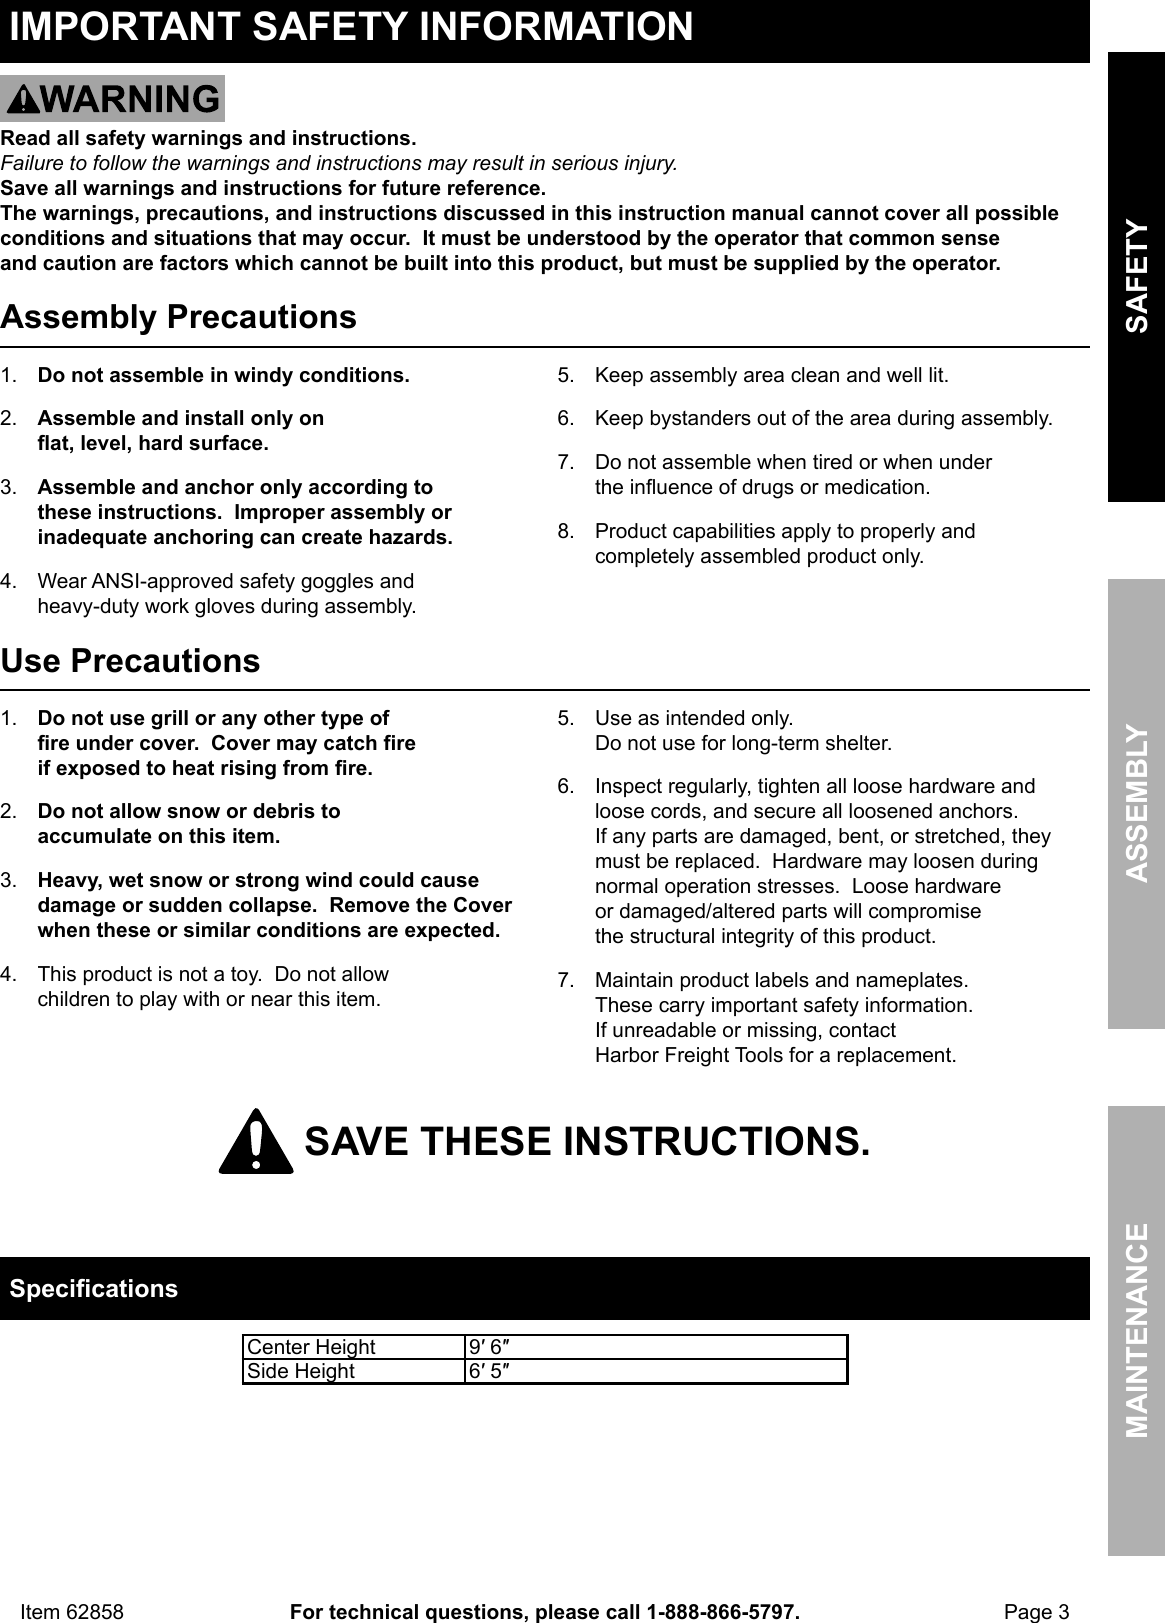 Page 3 of 12 - Manual For The 62858 10 Ft. X 20 Portable Car Canopy